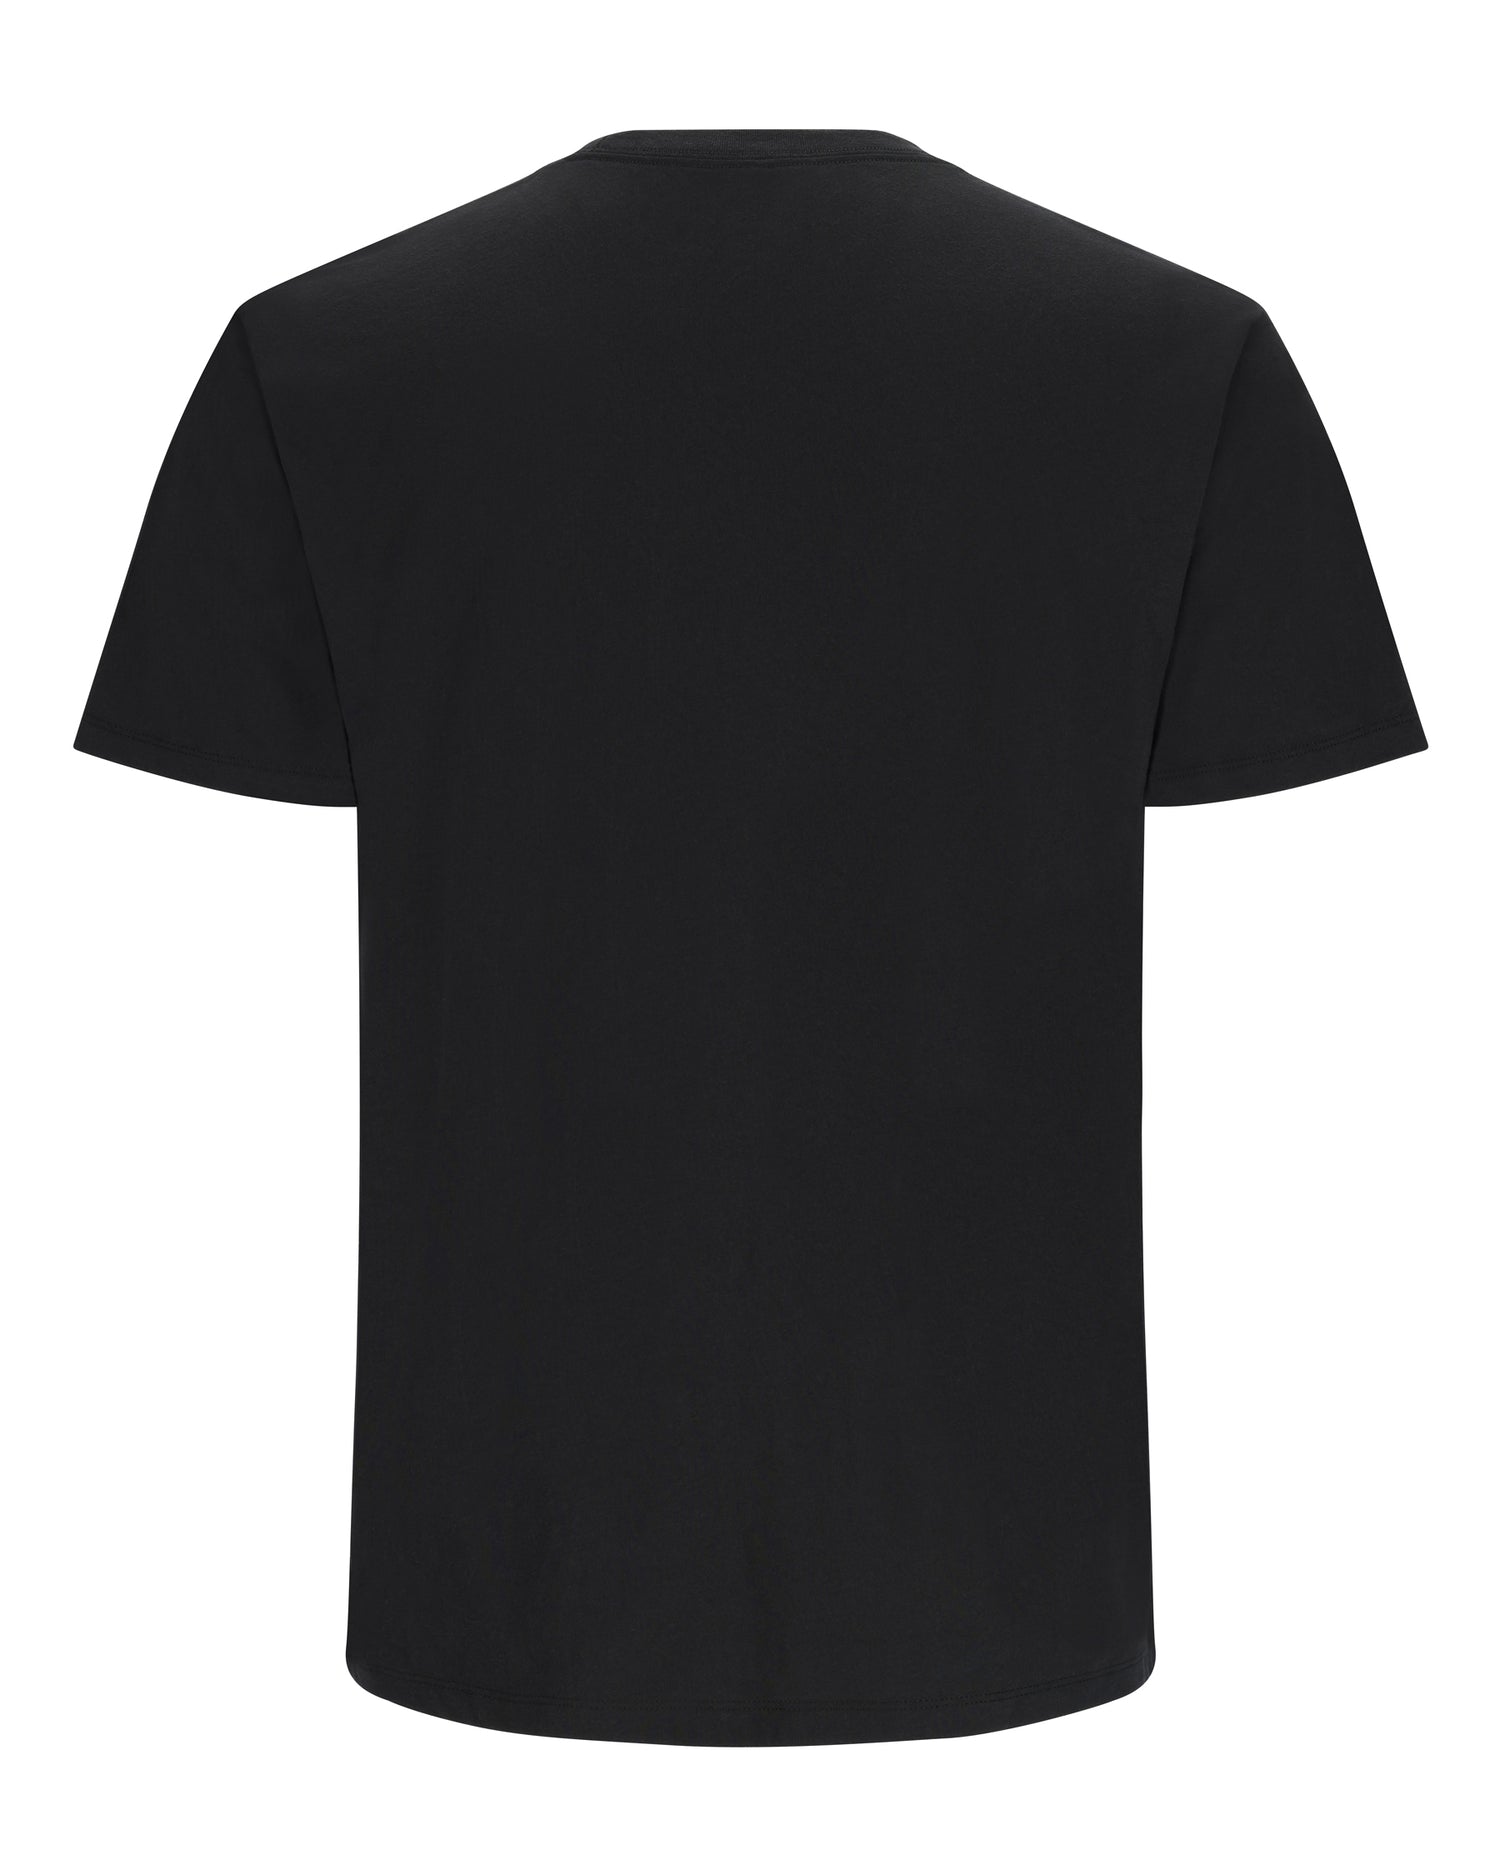 13775-001-roundabout-pocket-tee-mannequin-s23-back